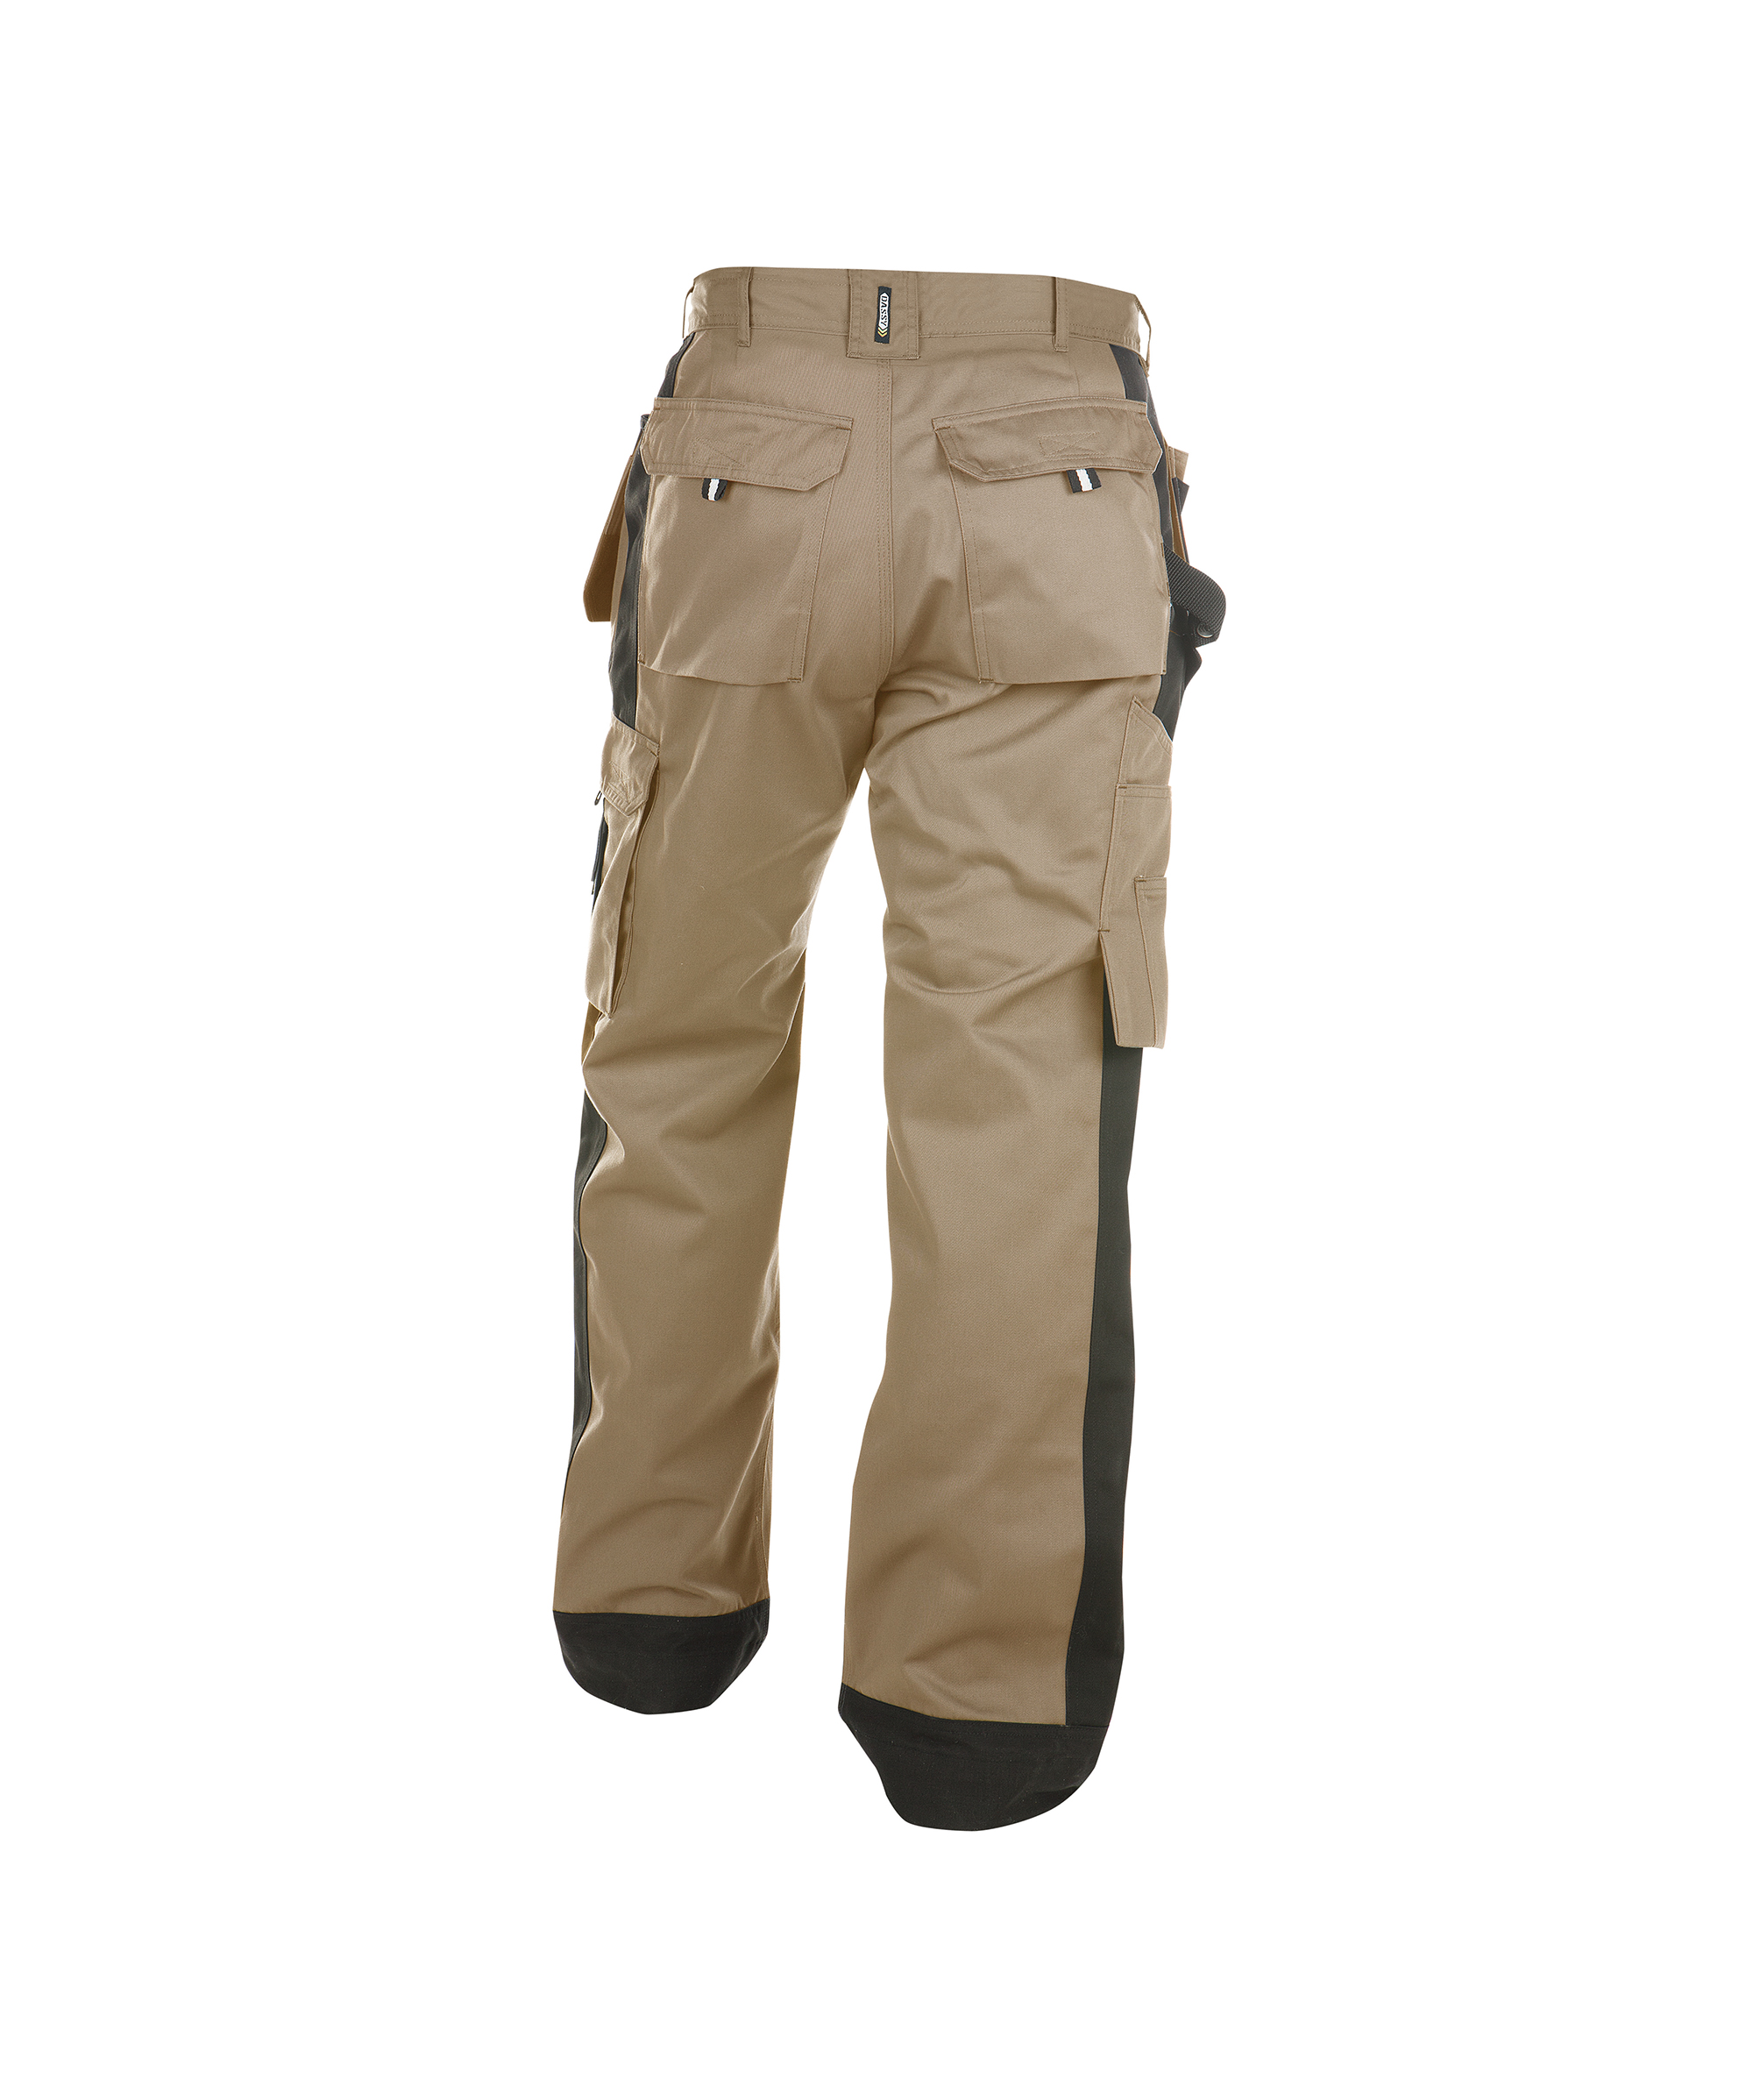 seattle_two-tone-work-trousers-with-multi-pockets-and-knee-pockets_beige-black_back.jpg